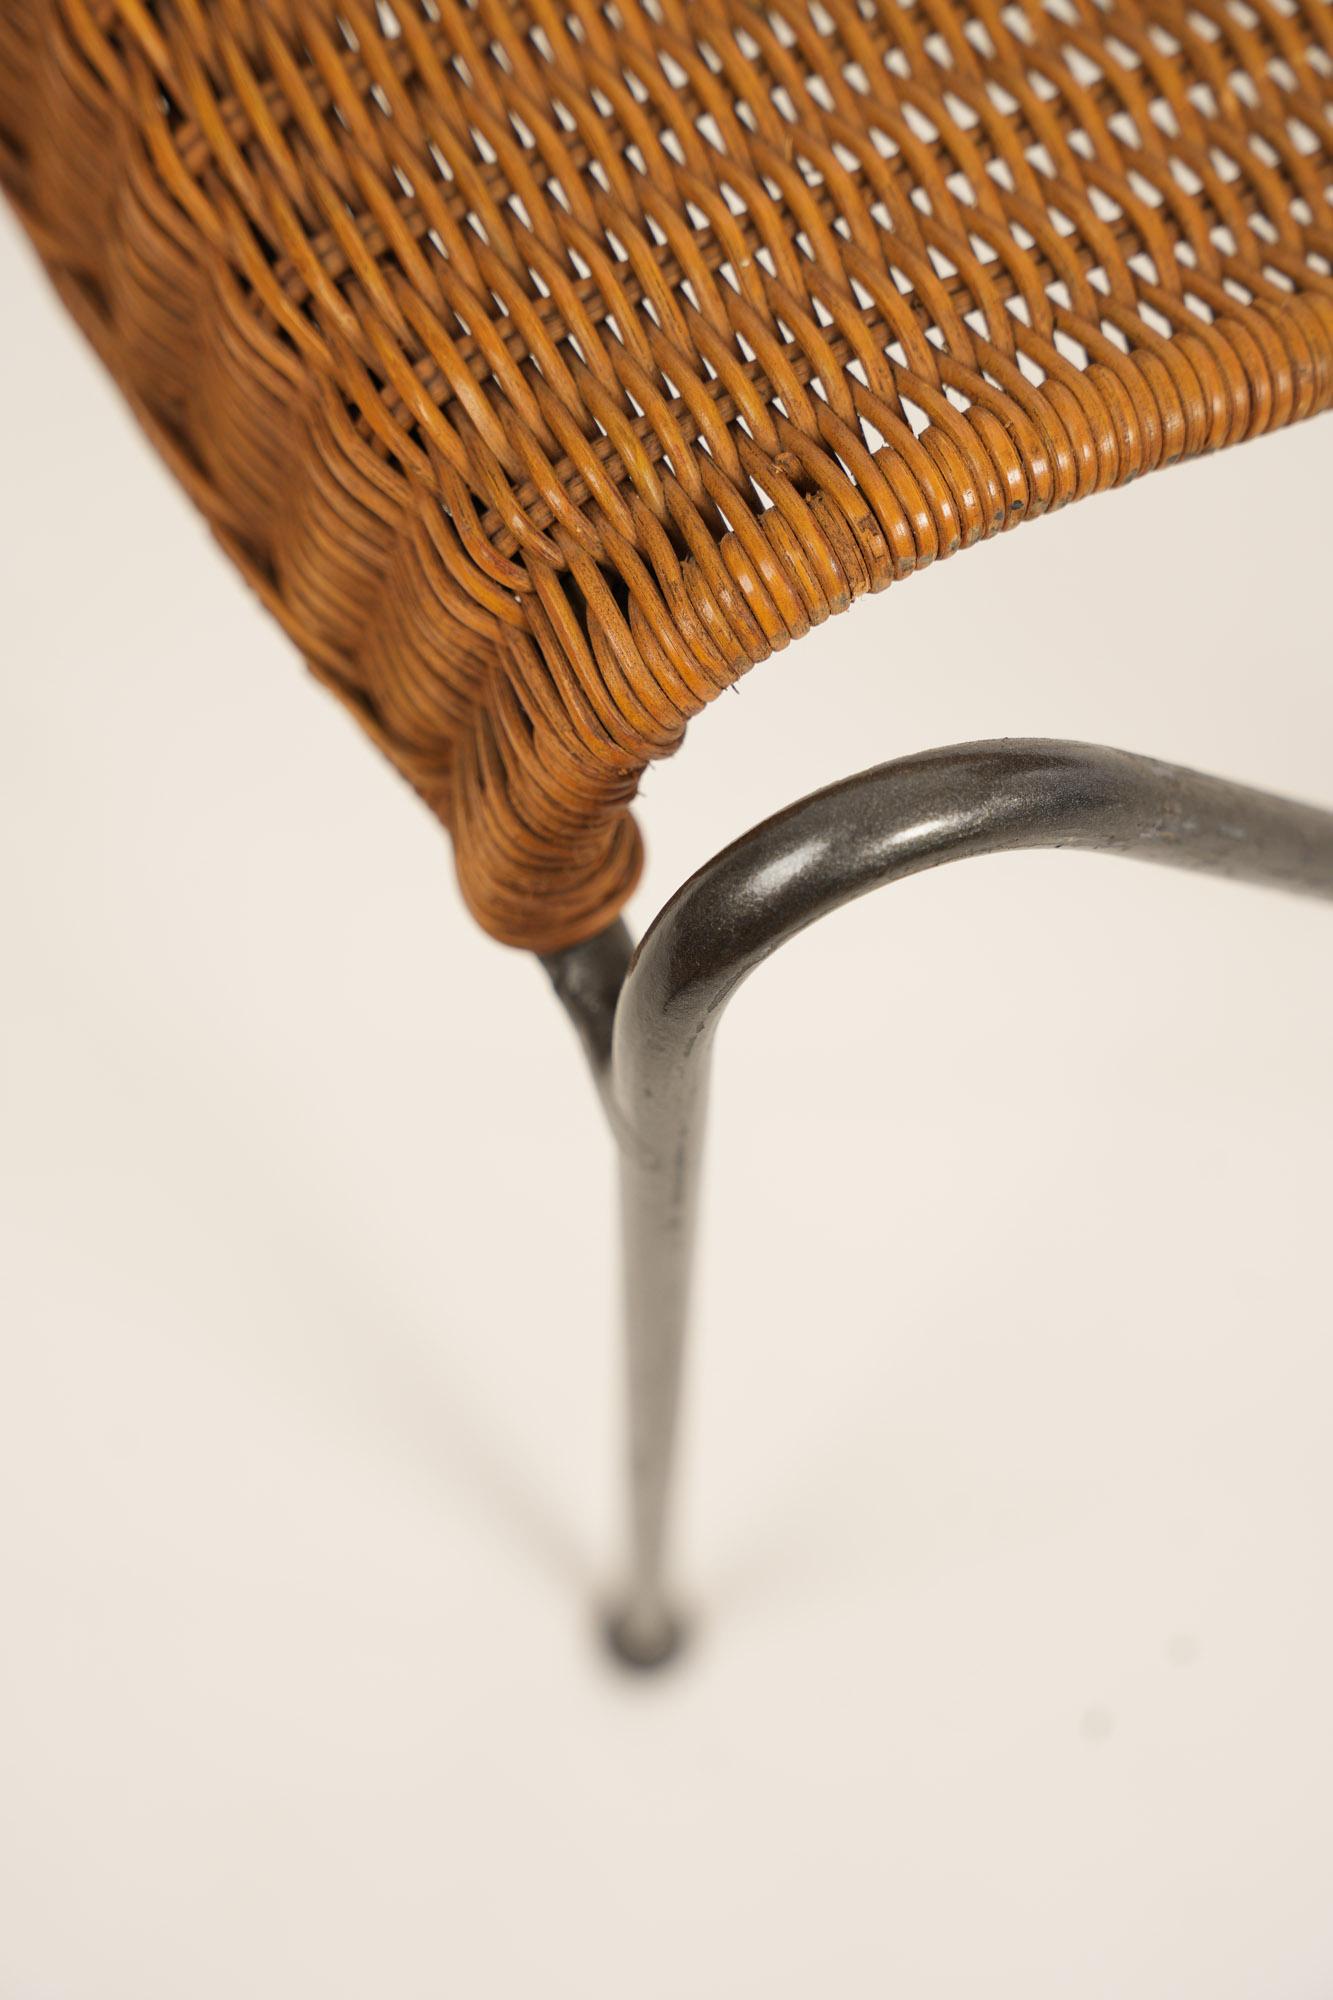 Wicker and Iron Chair By Frederic Weinberg 1950s For Sale 4